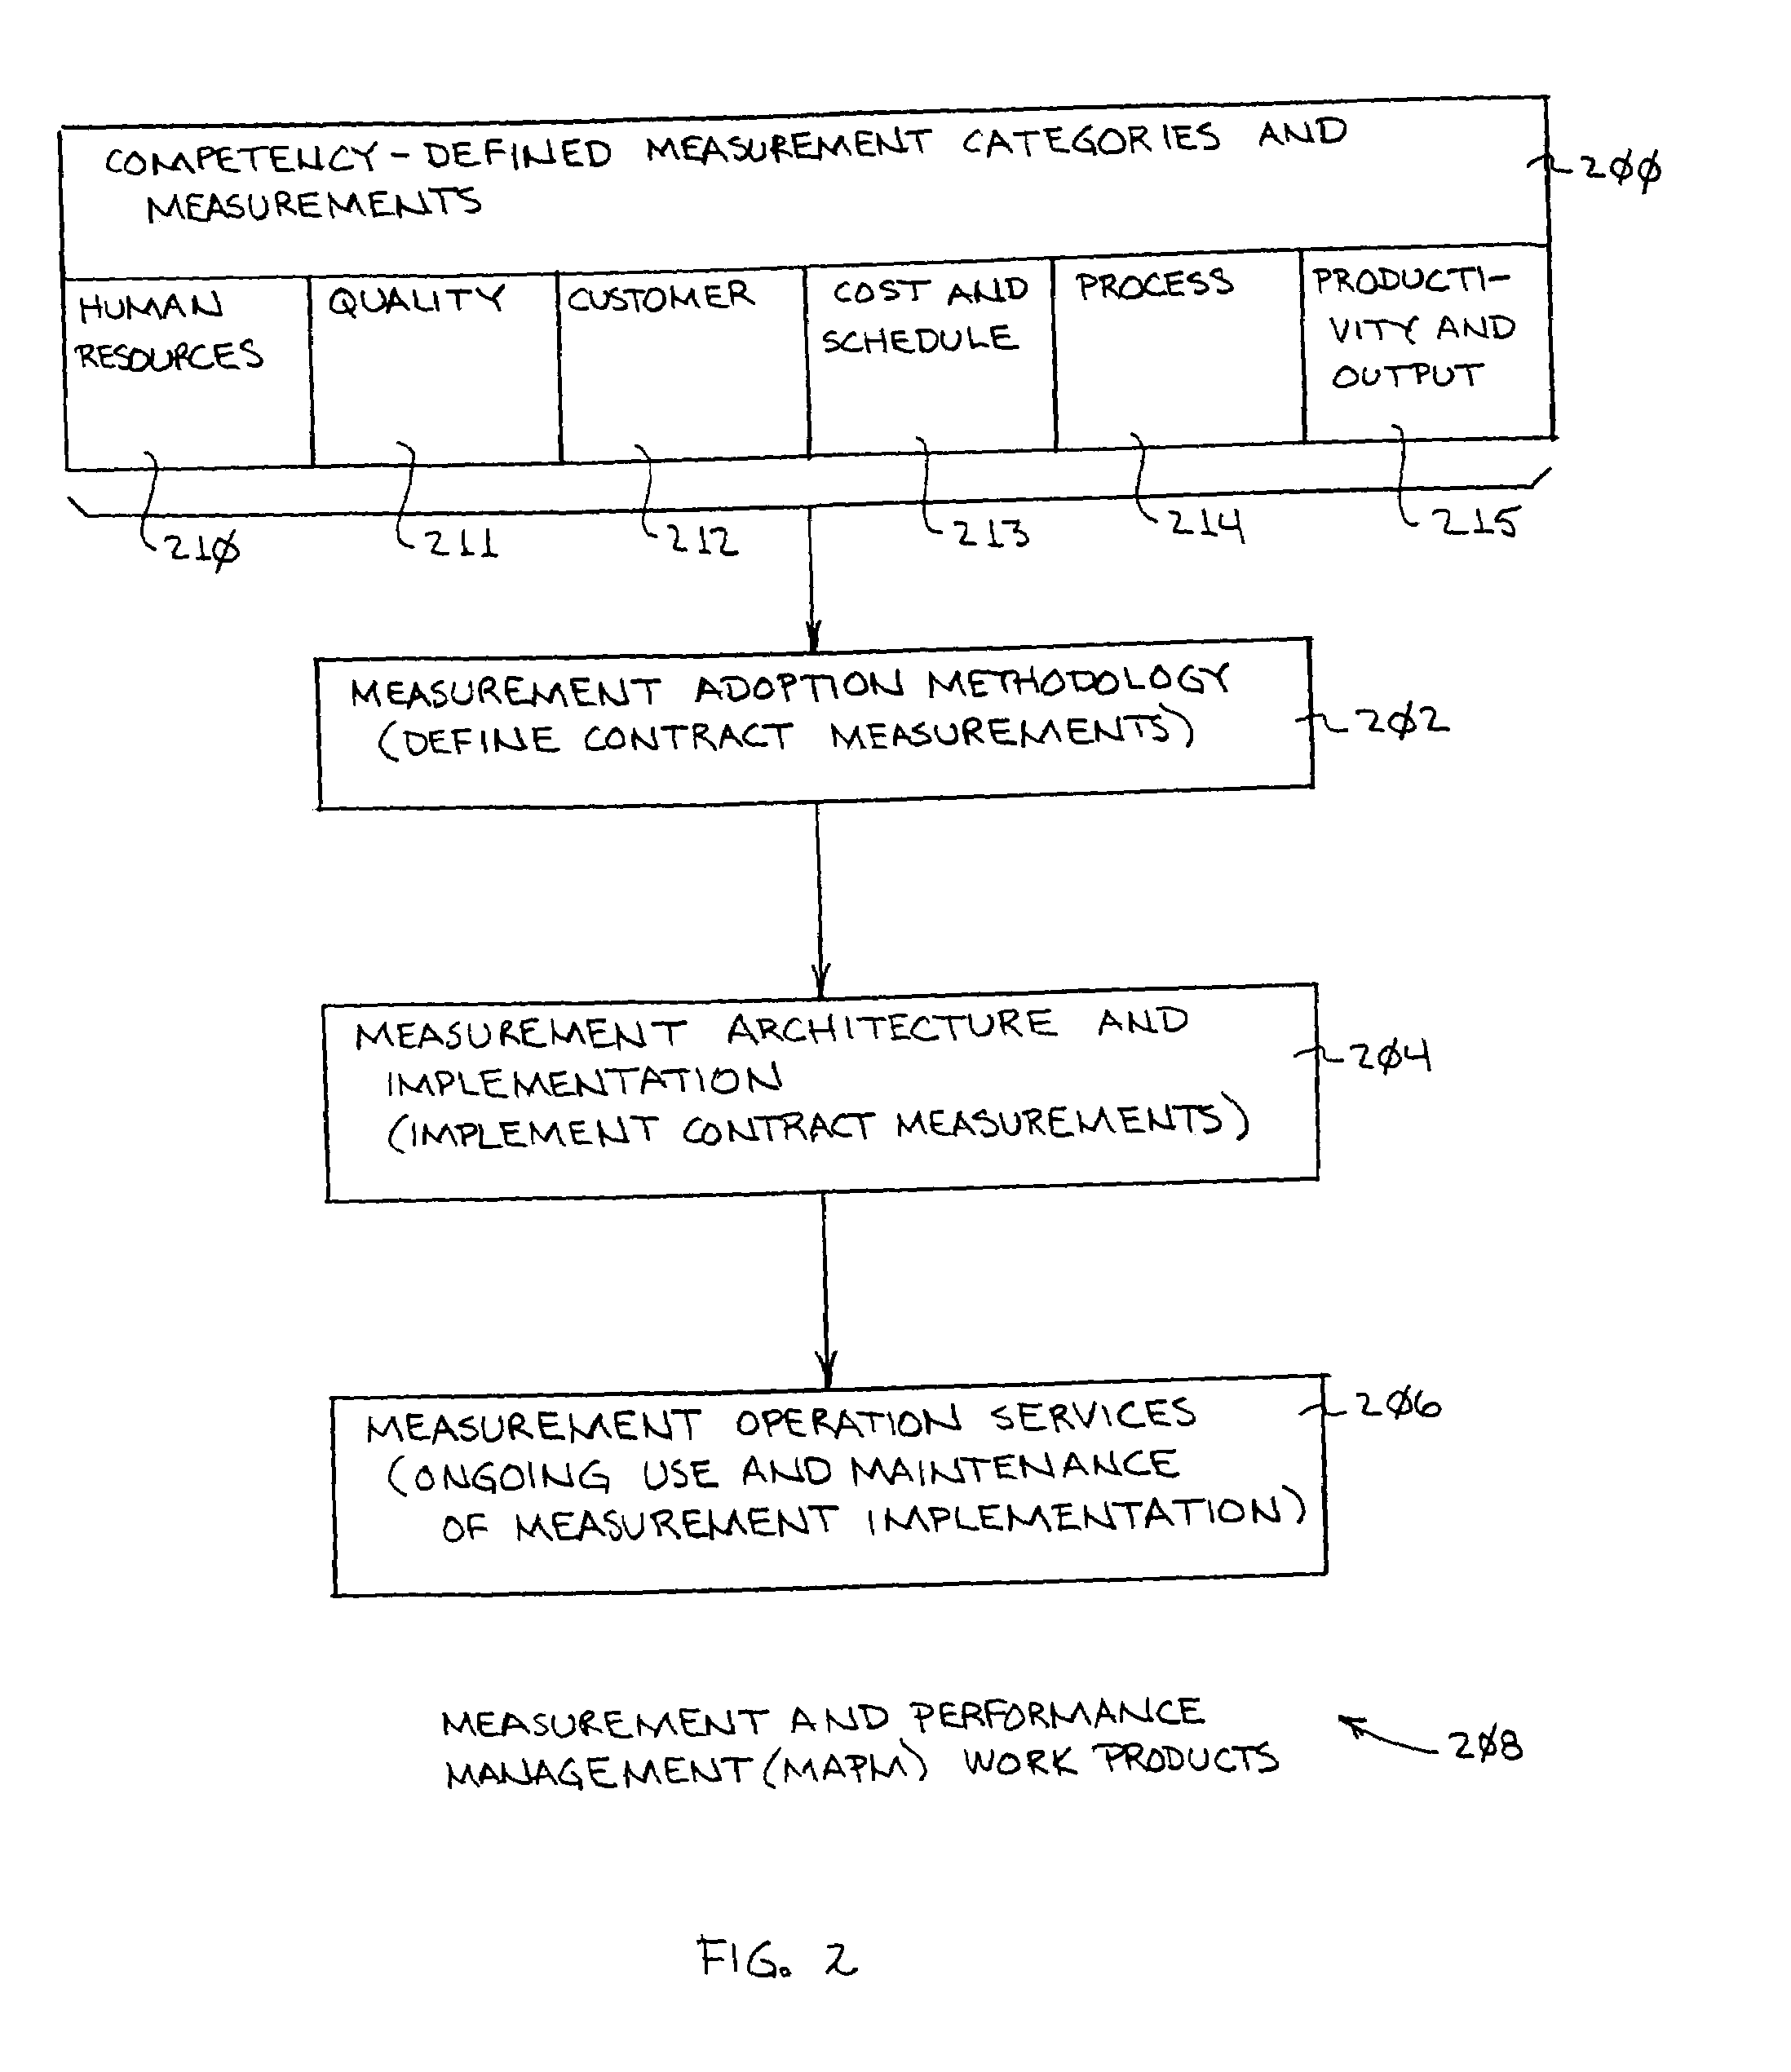 System and method for measuring and managing performance in an information technology organization